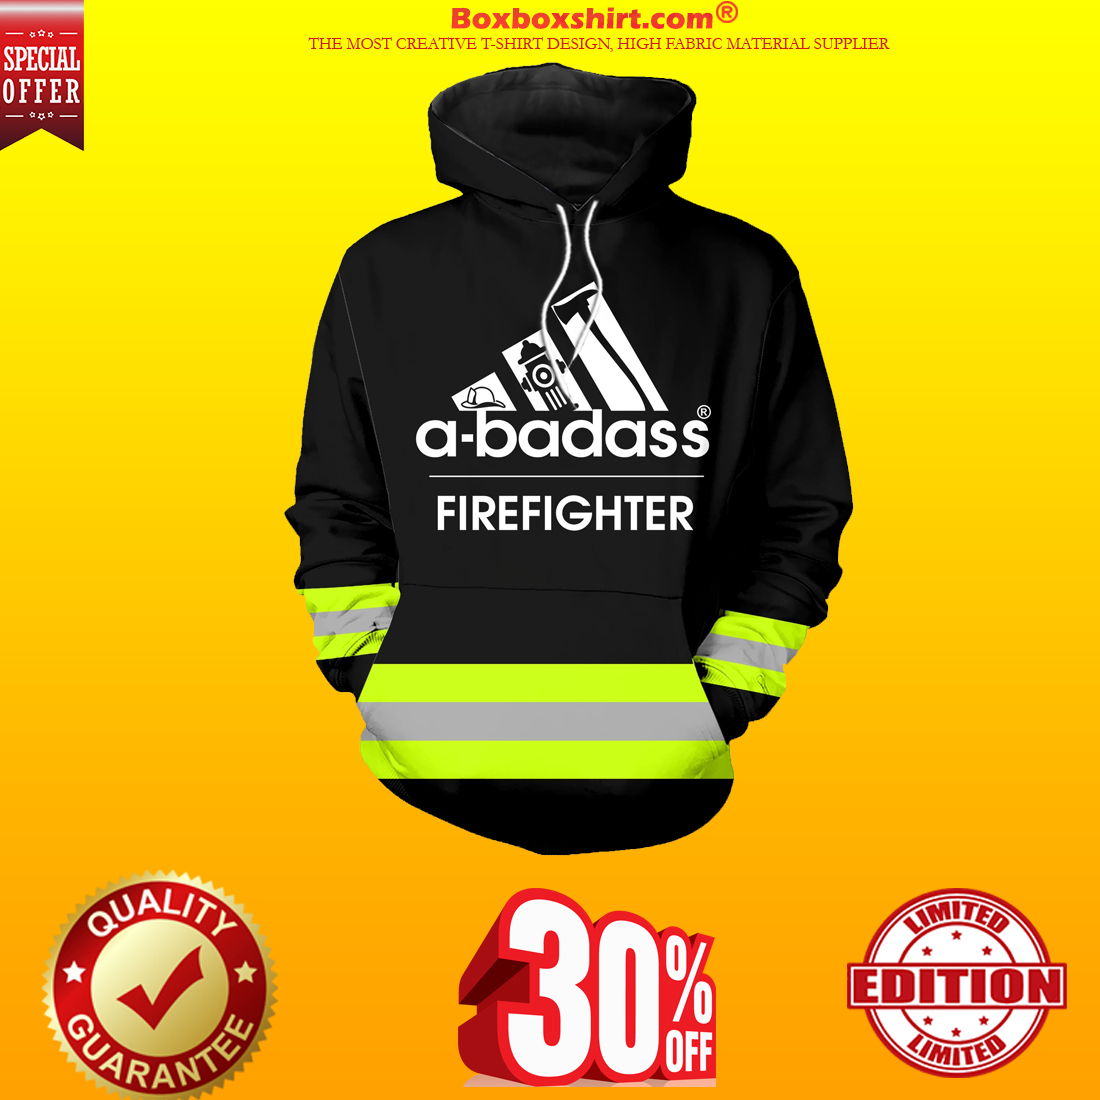 Under Armour firefighter hoodie and shirt green line 3d